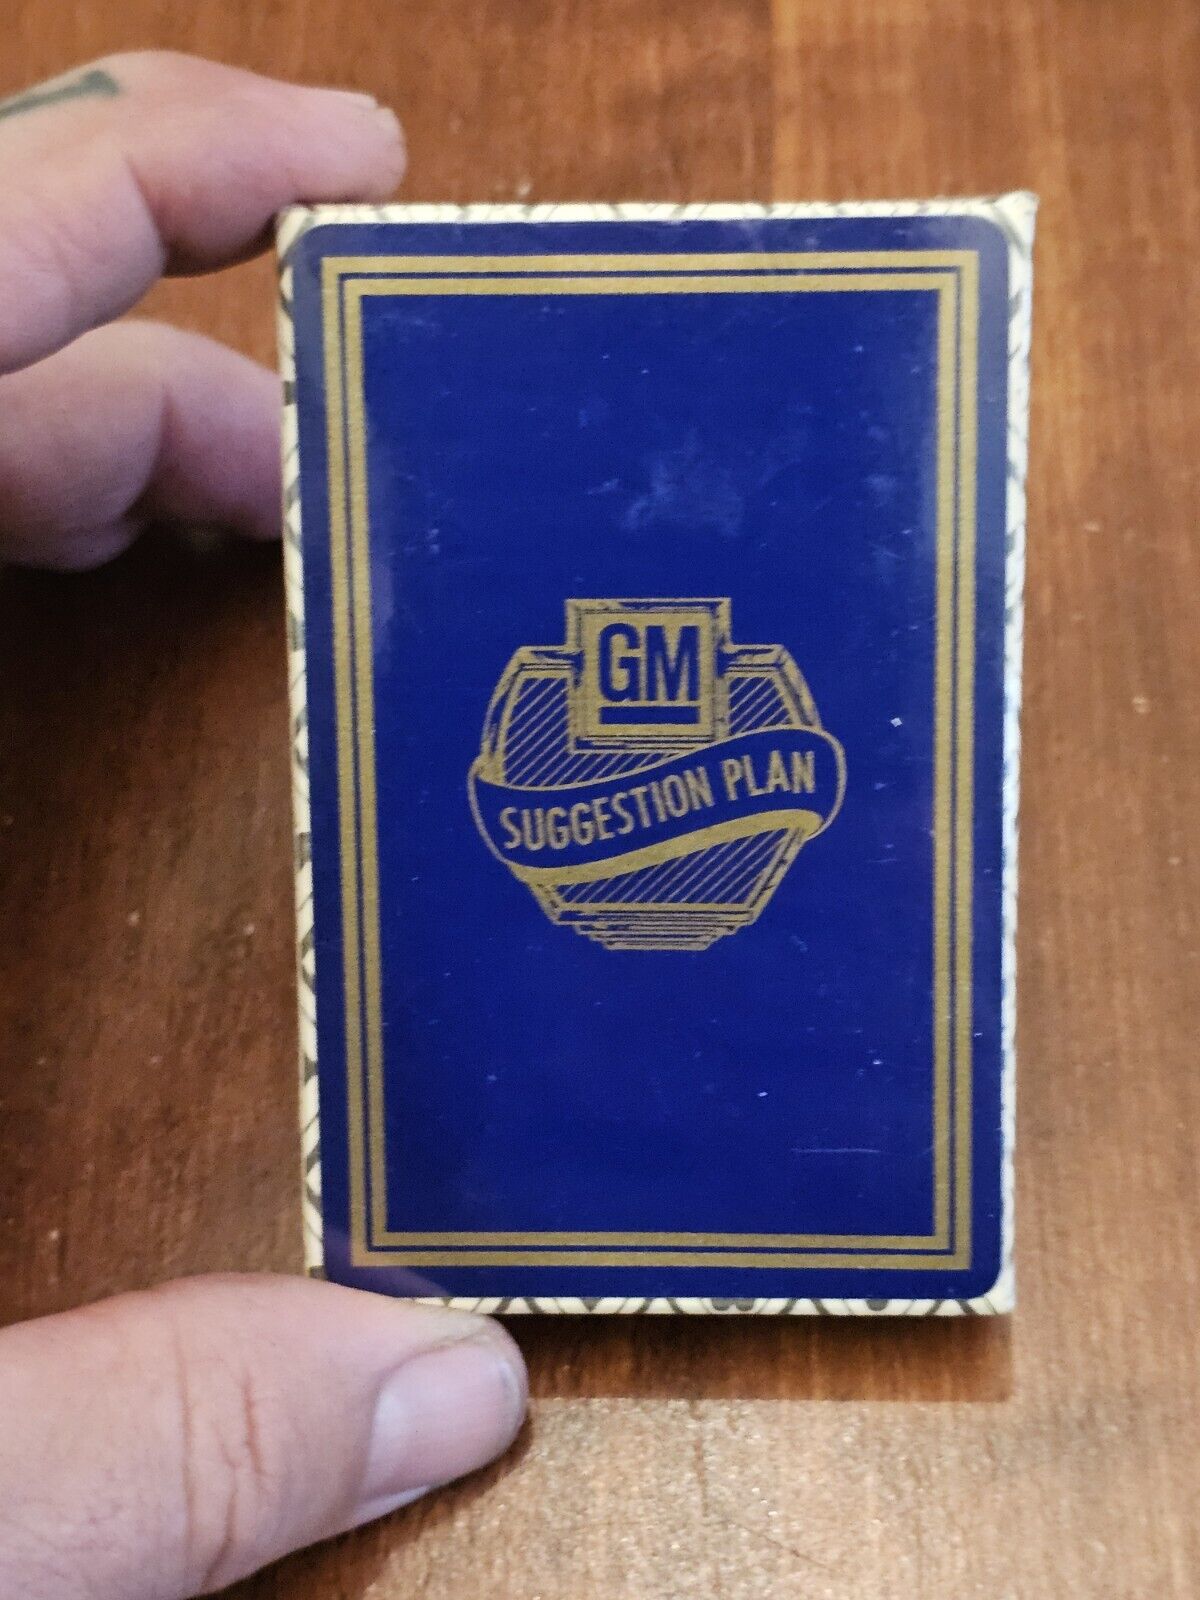 GM General Motors Suggestion Plan New Sealed Playing Cards Automotive Advertisem